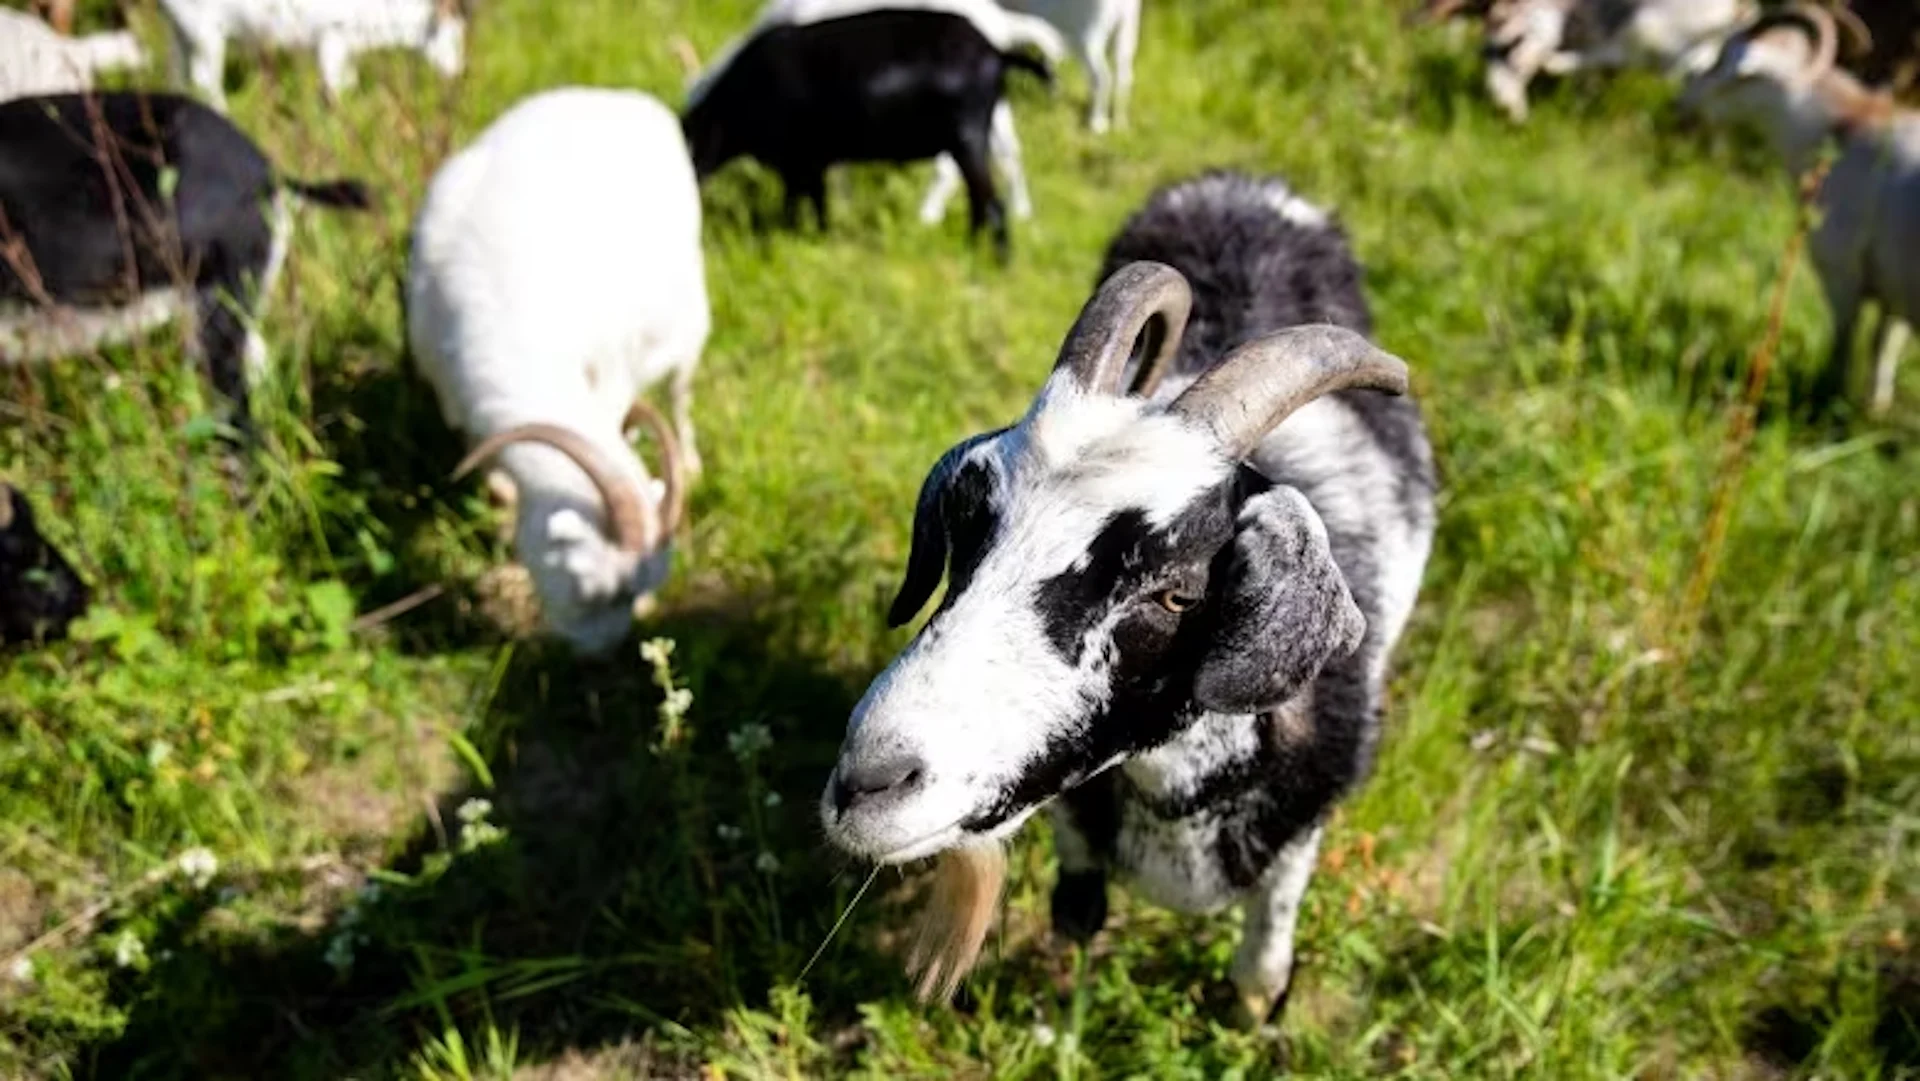 Quesnel, B.C., turns to goats to help curb wildfire risk